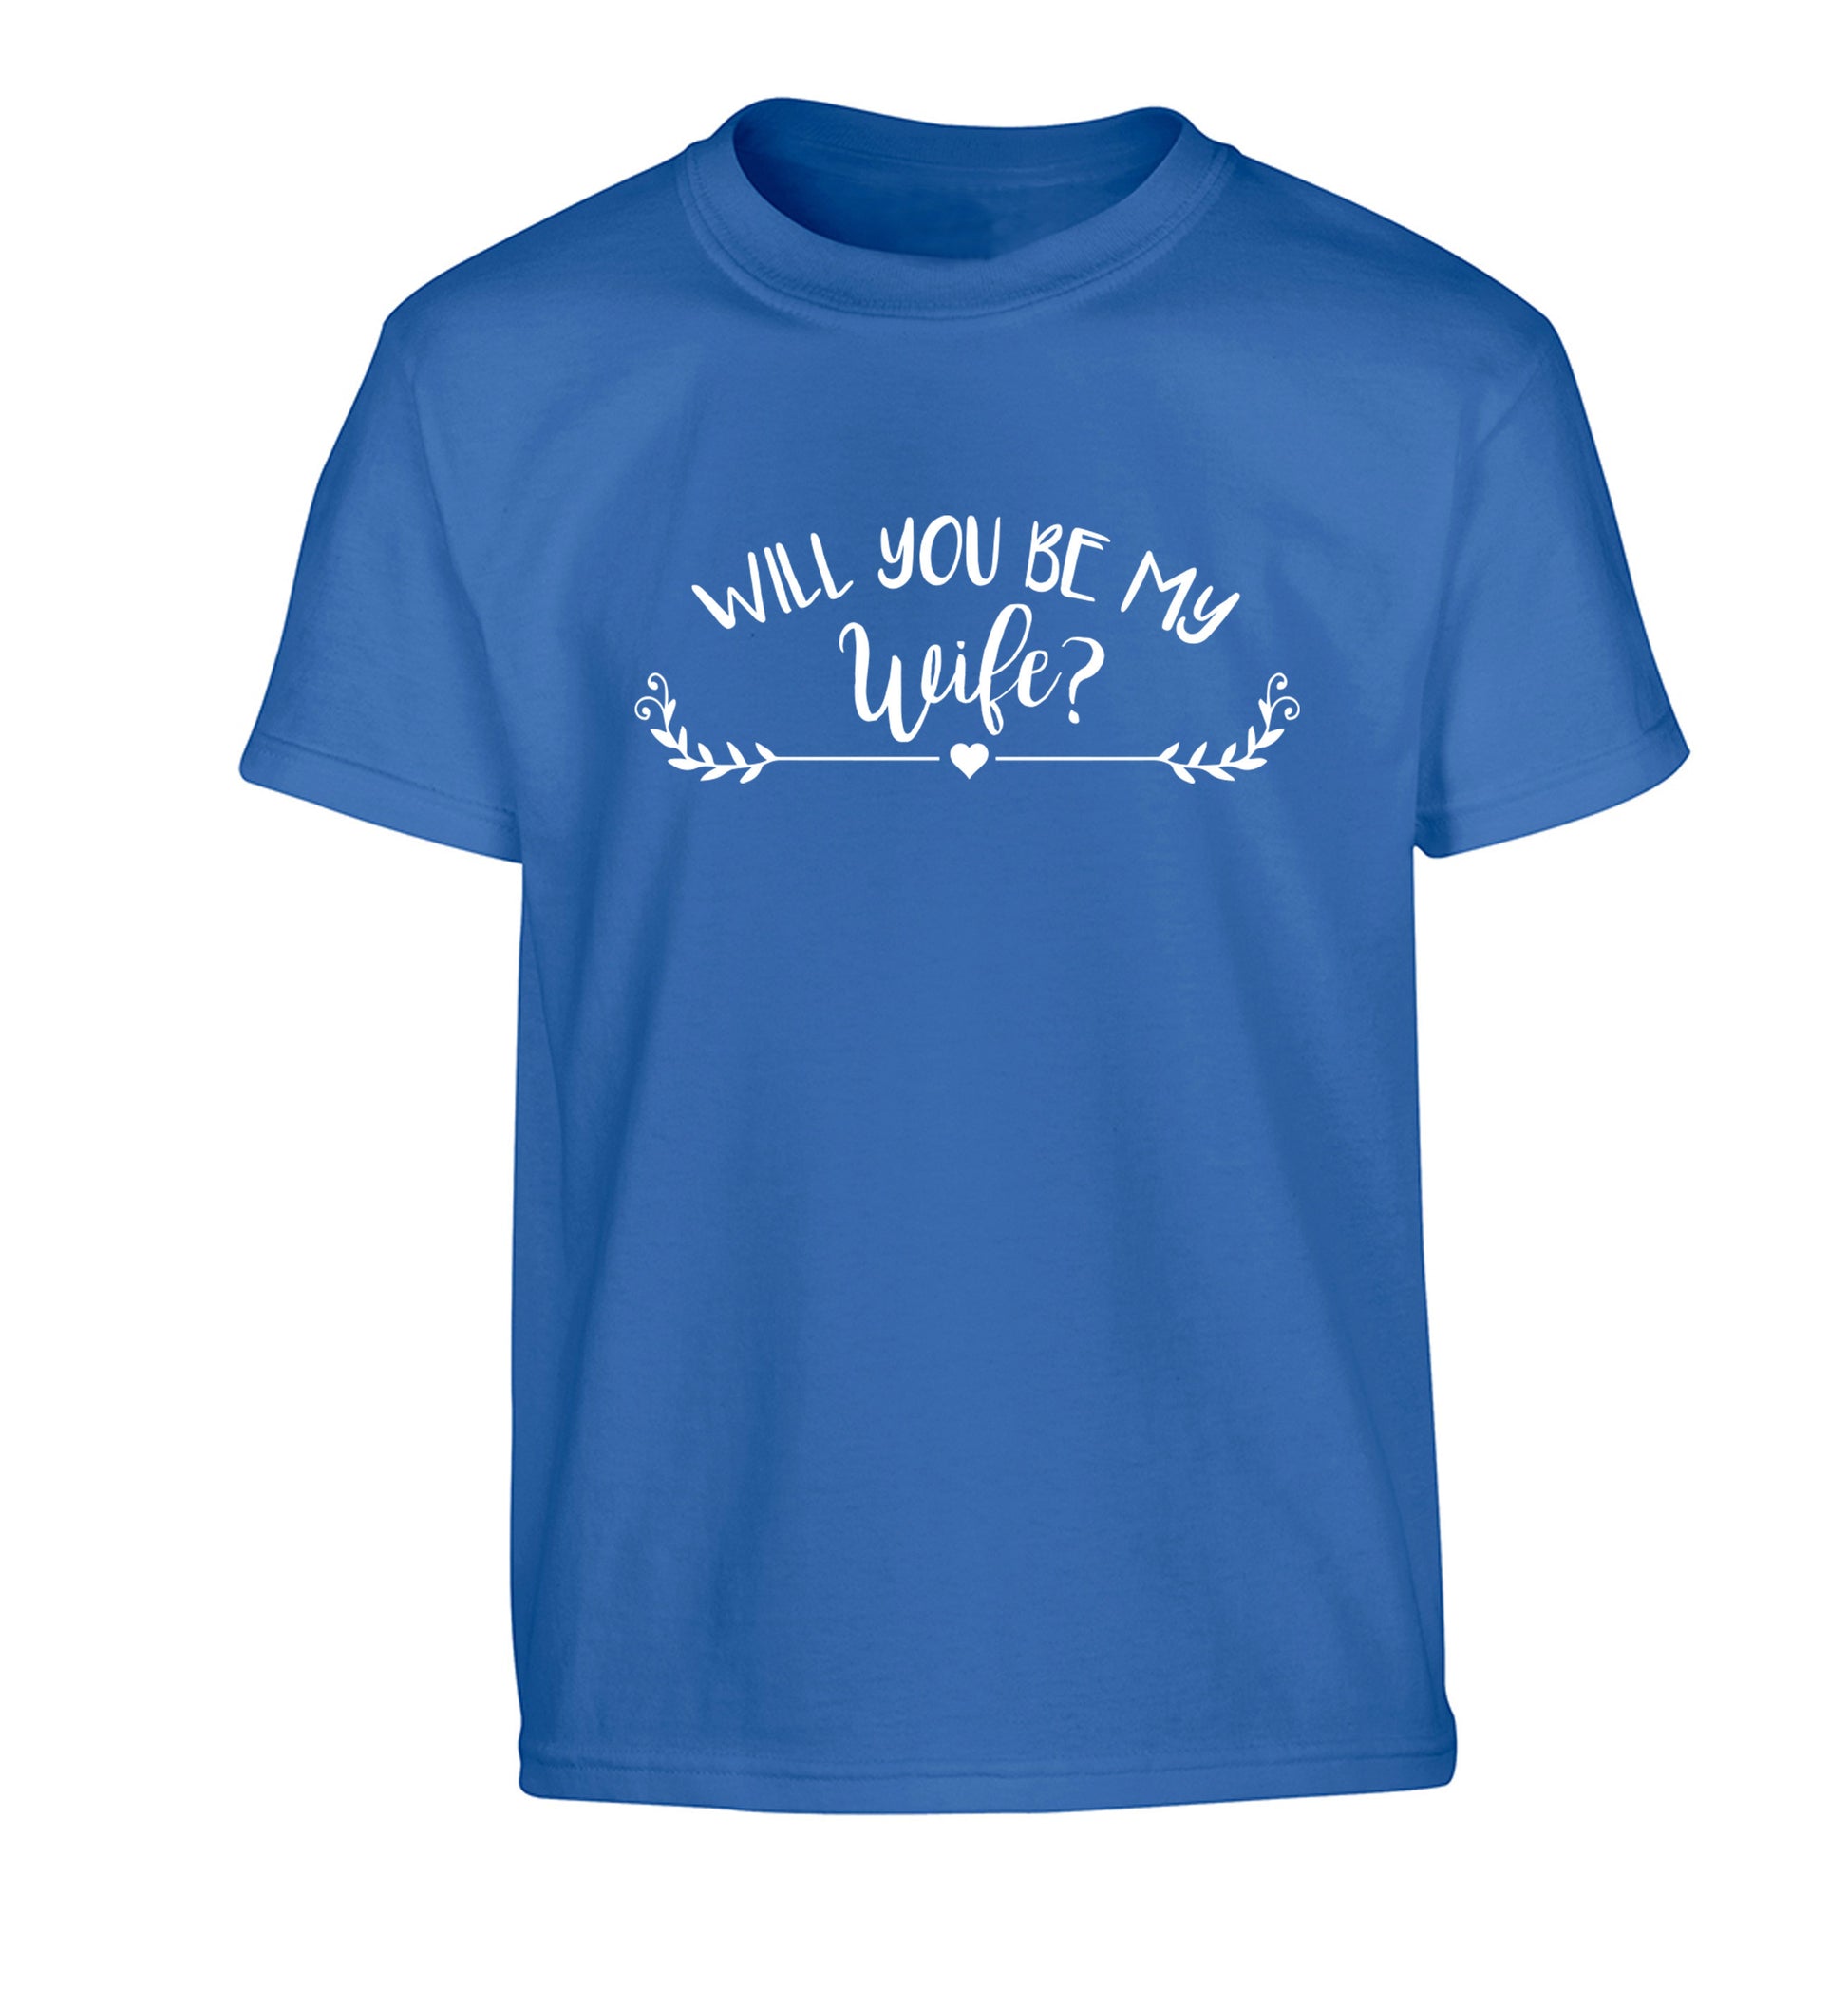 Will you be my wife? Children's blue Tshirt 12-14 Years